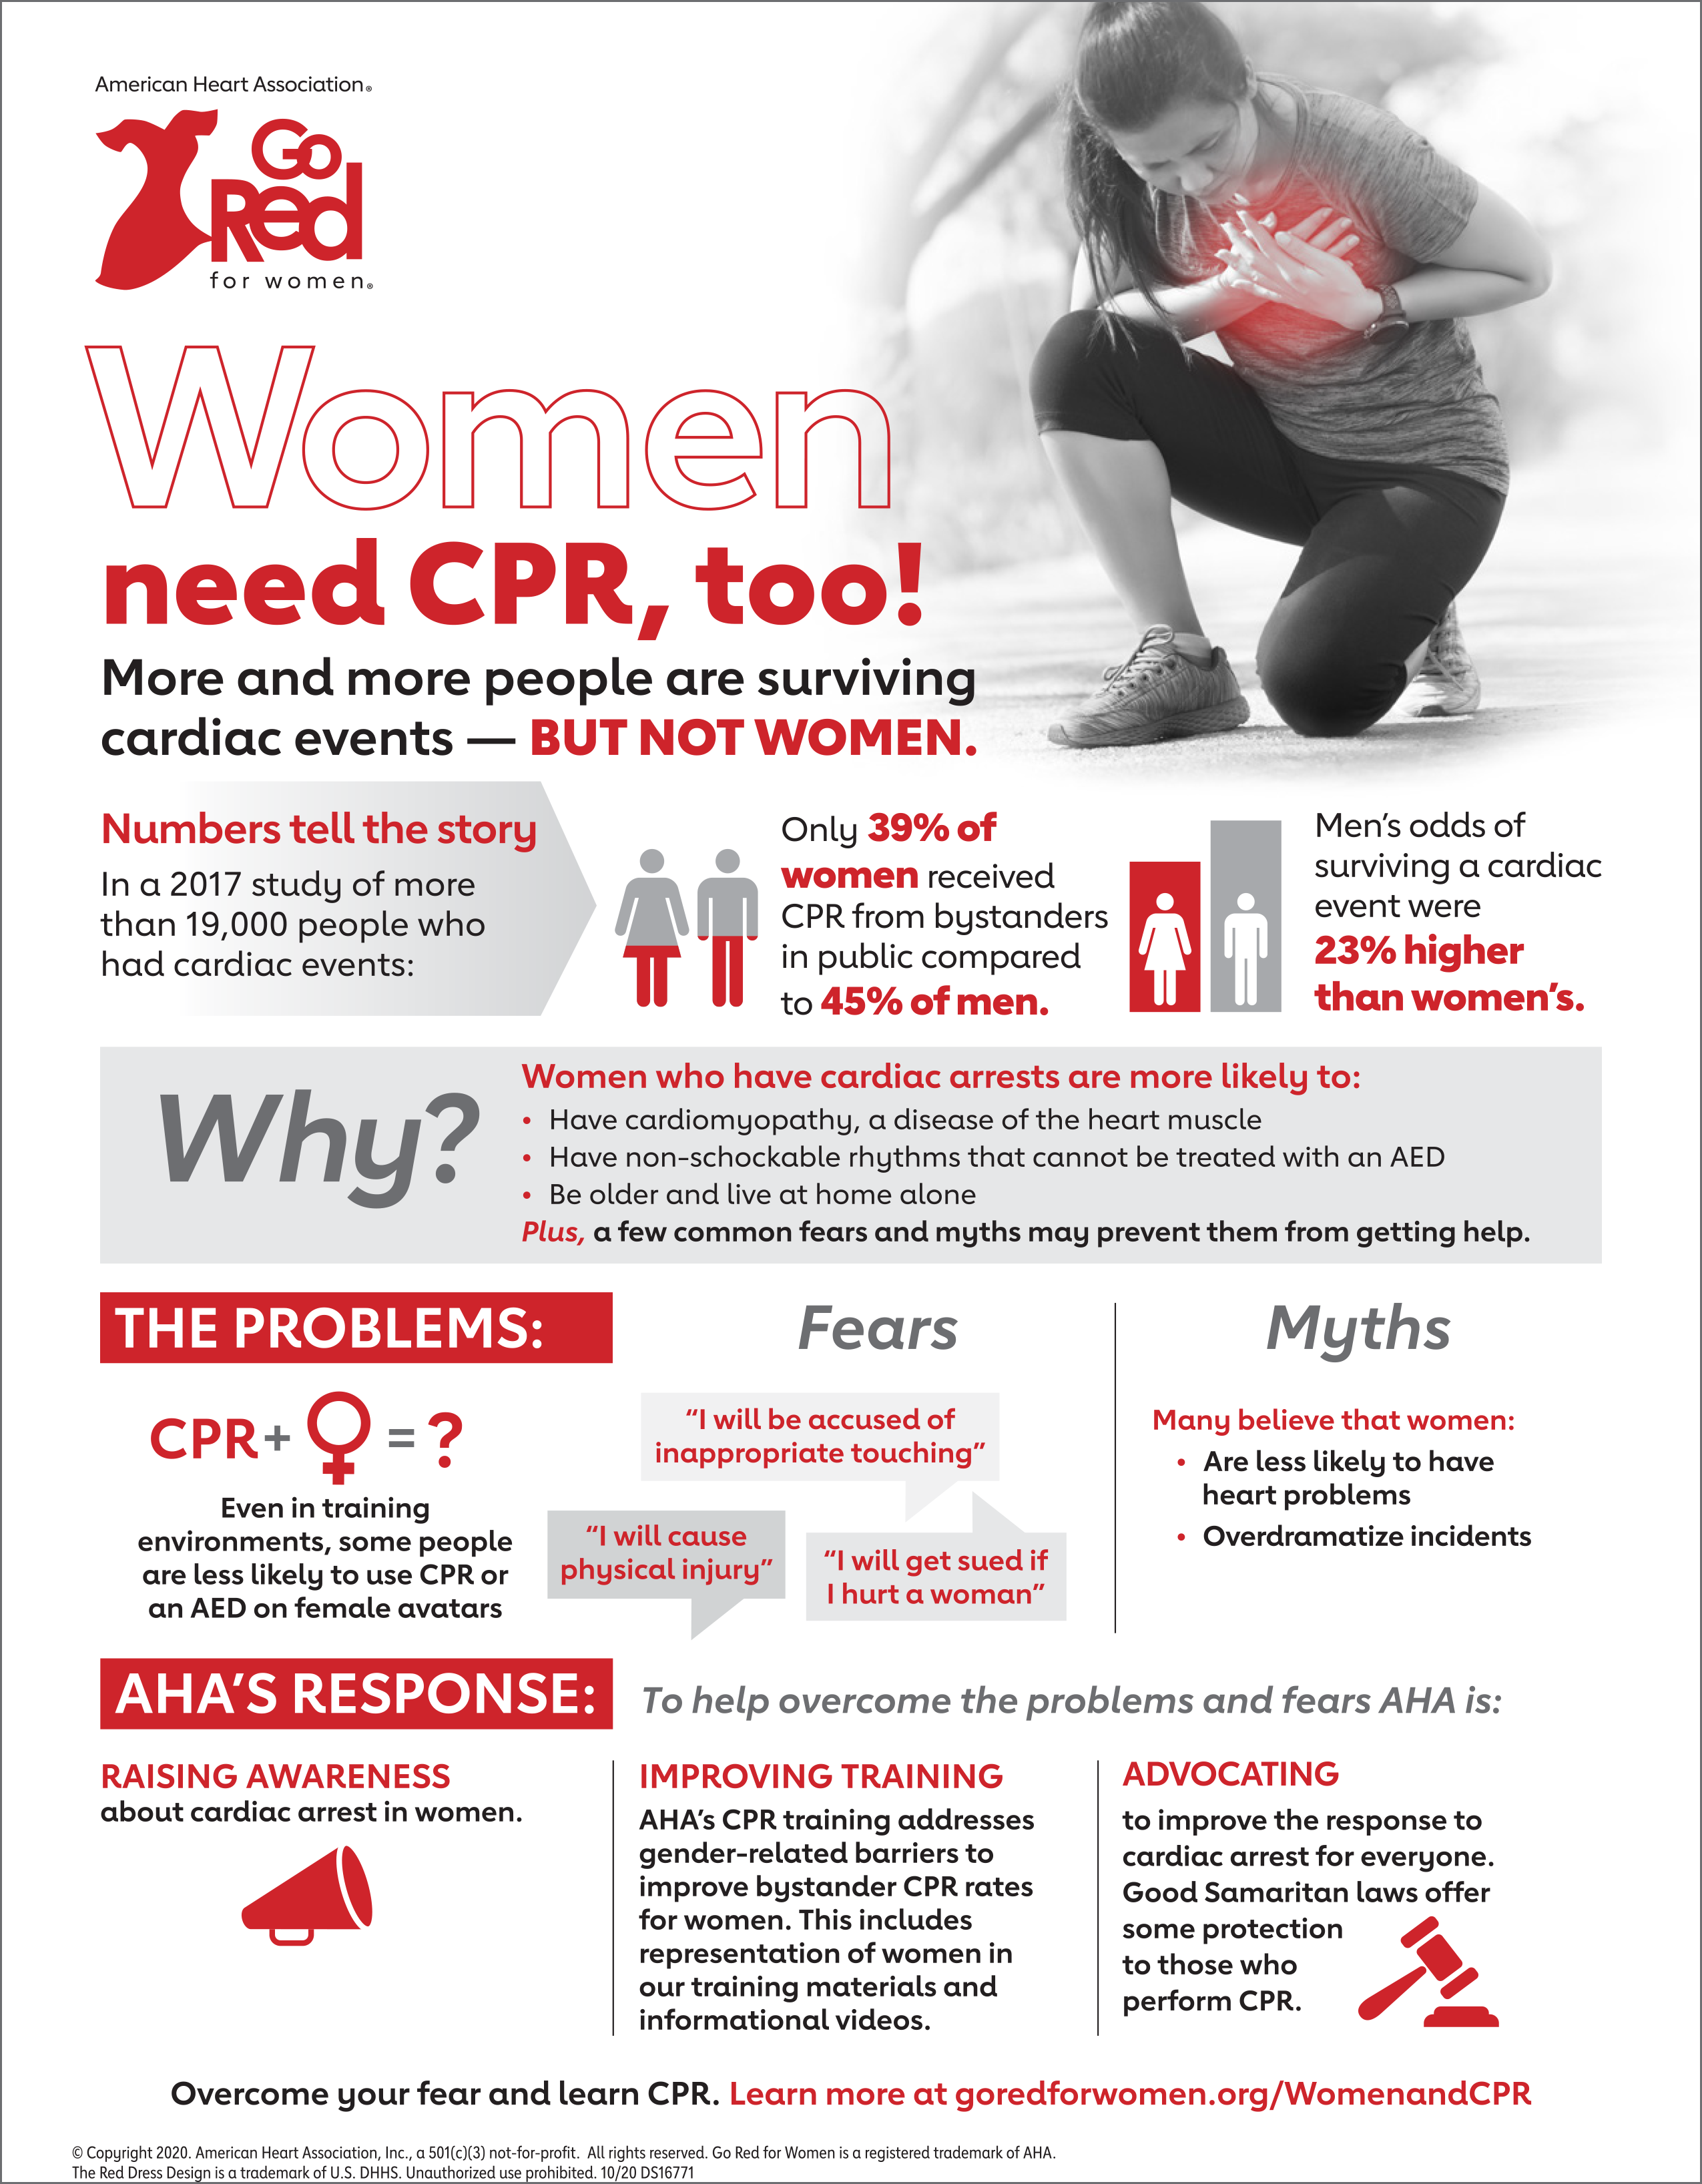 Go Red for Women: Women need CPR, too, Learn more at goredforwomen.org/WomenandCPR.